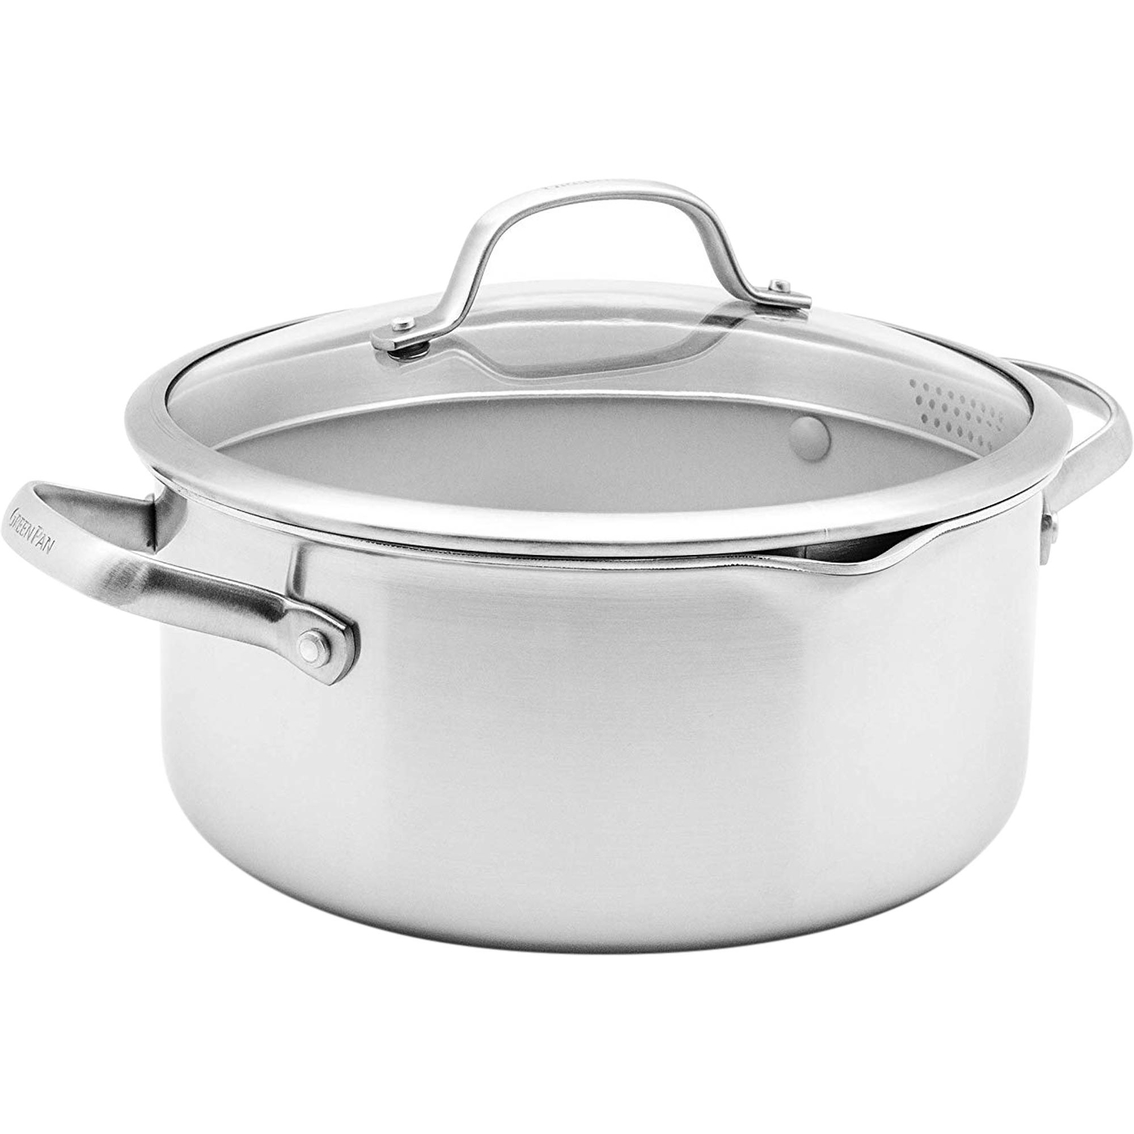 Greenpan Venice Pro 8qt Stockpot W/ Straining Lid And Stainless Steel  Insert, Stock Pots, Household